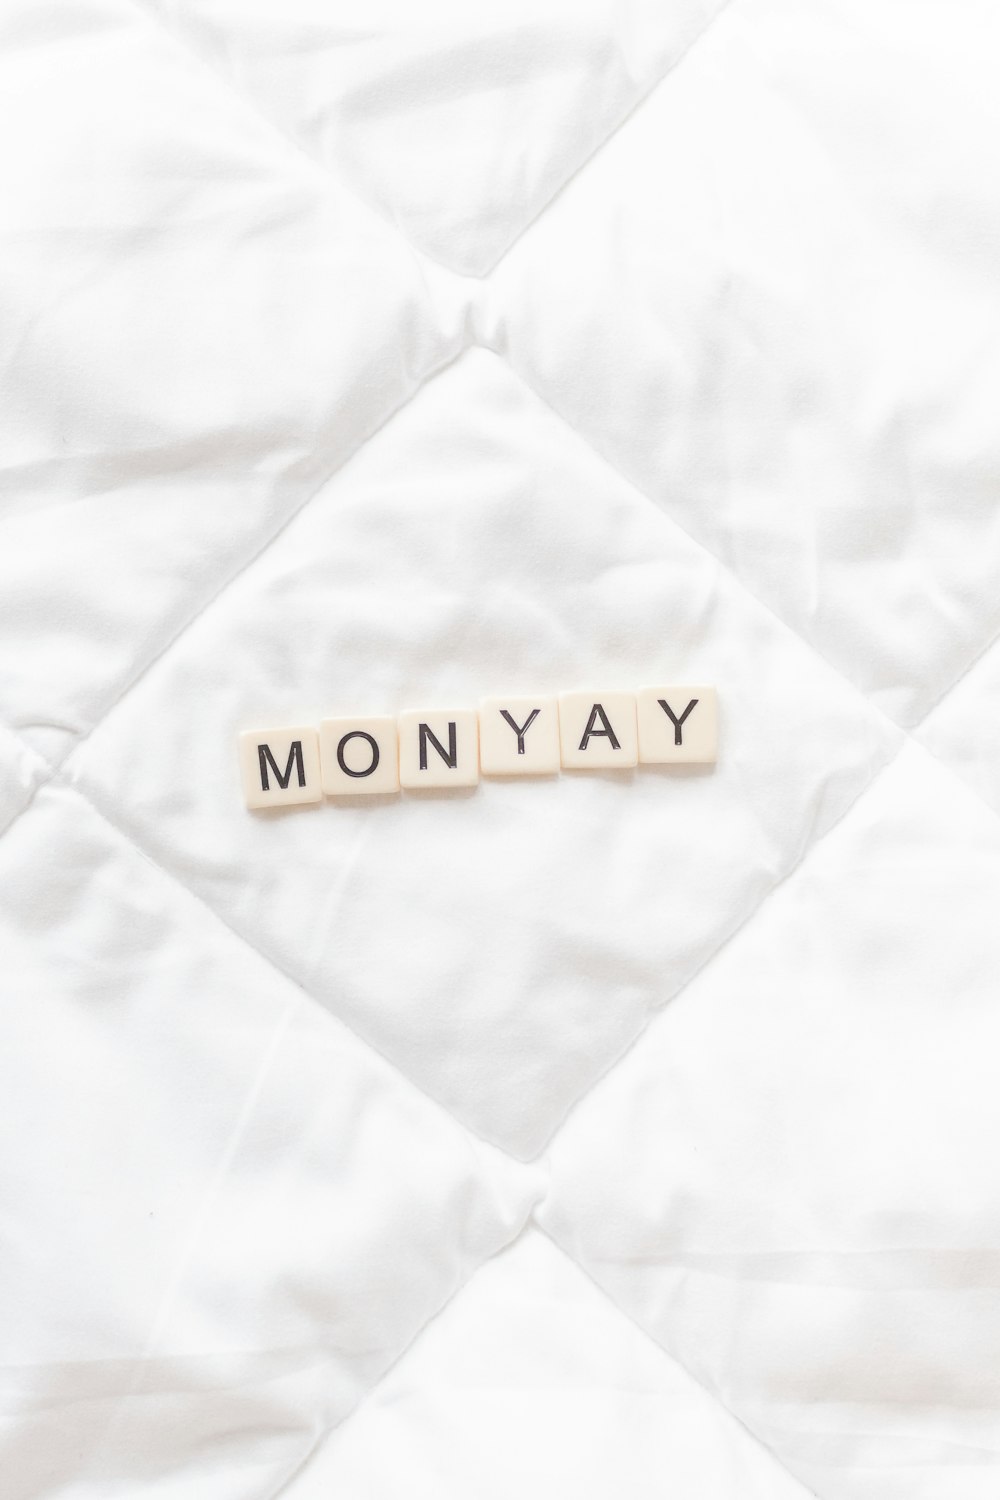 the word monday spelled with scrabbles on a white quilt